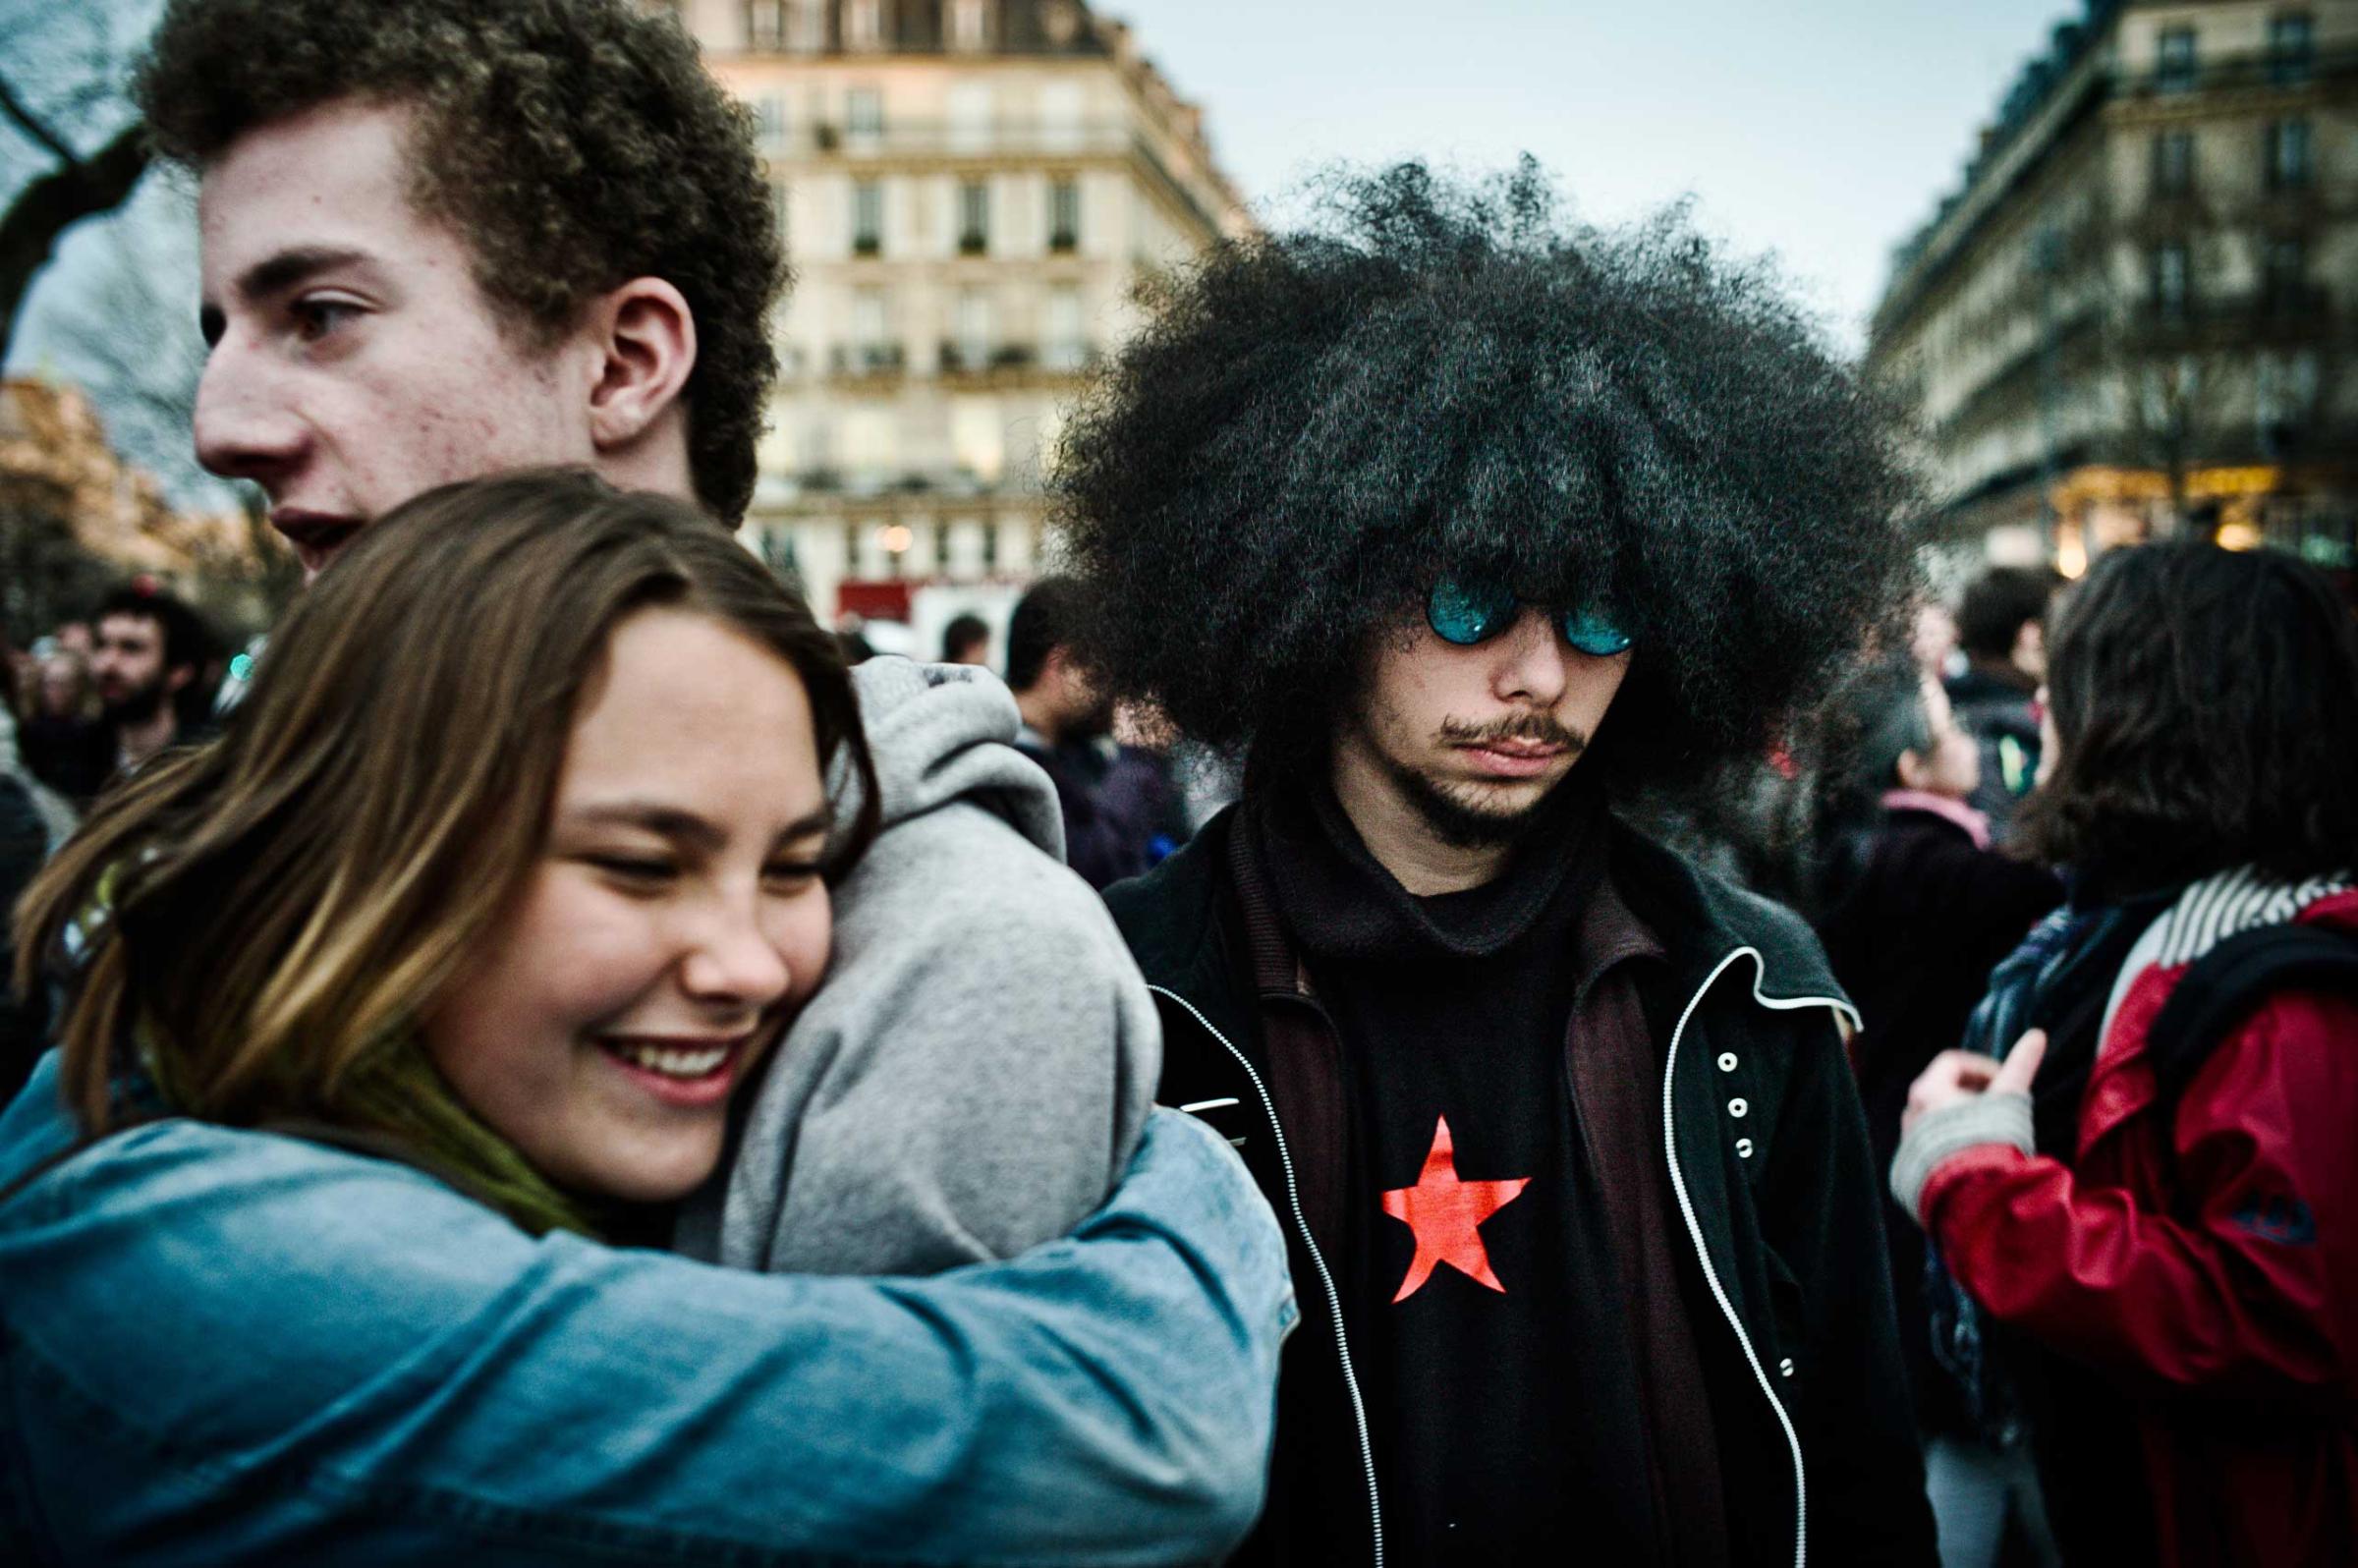 People coming together at the Nuit Debout, April 4, 2016.